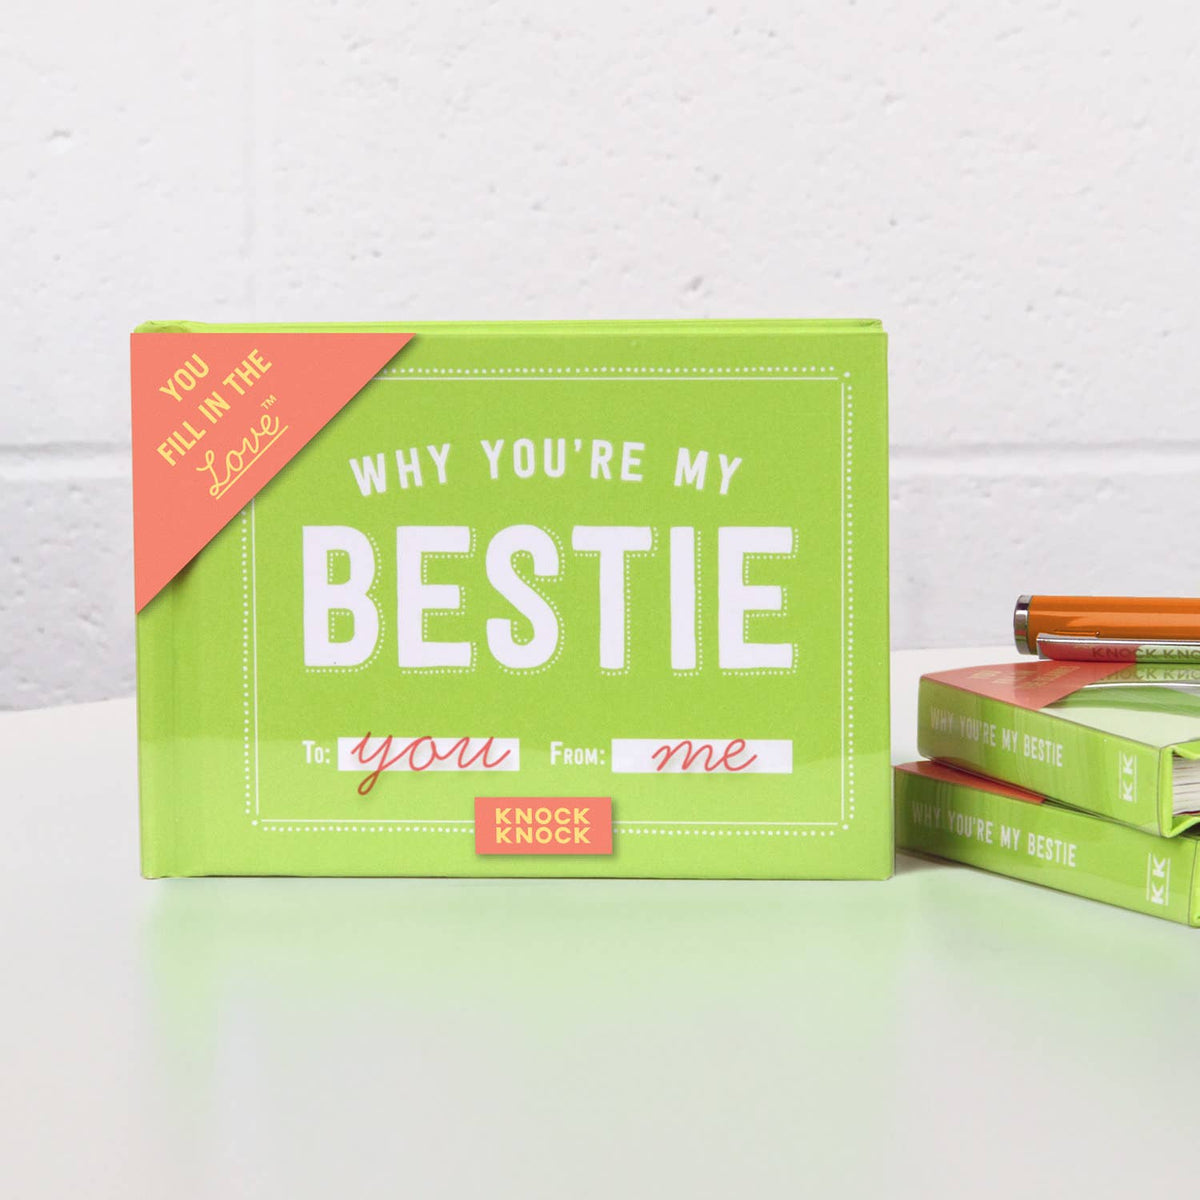 Why You're My Bestie Fill in the Love® Book